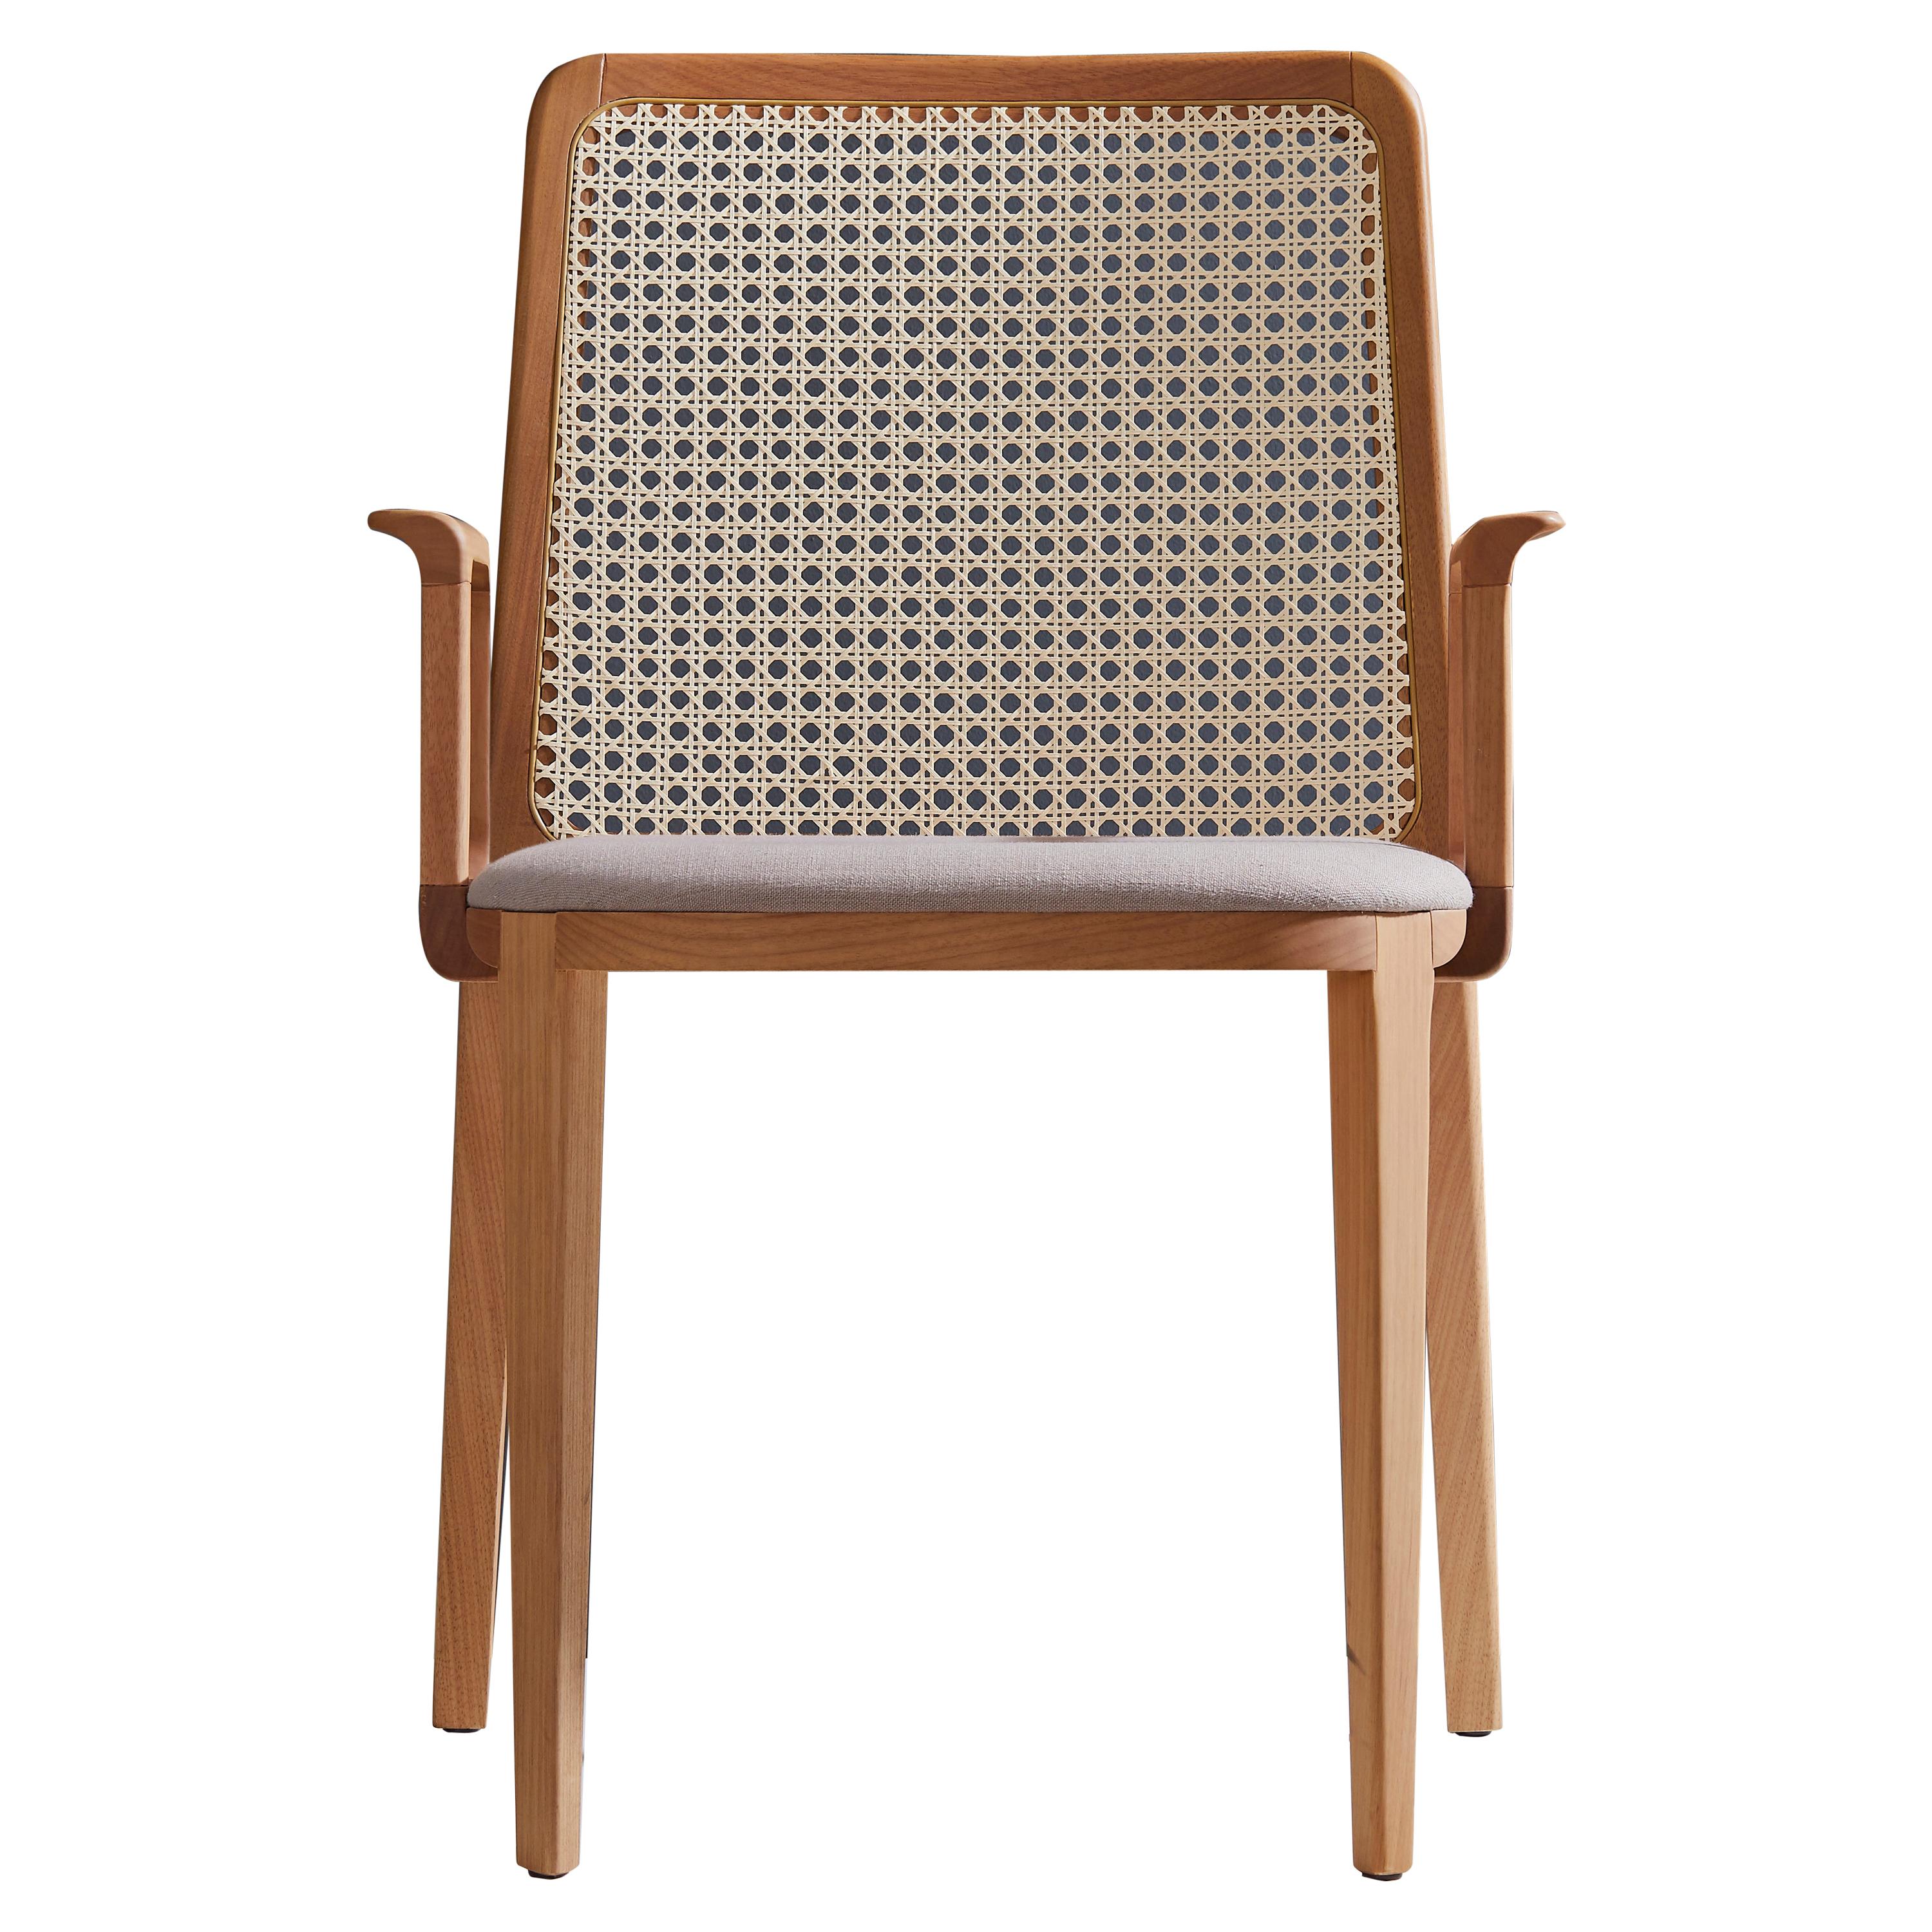 Minimal Style, Solid Wood Chair, Textile Seating, Caning Backboard, with Arms